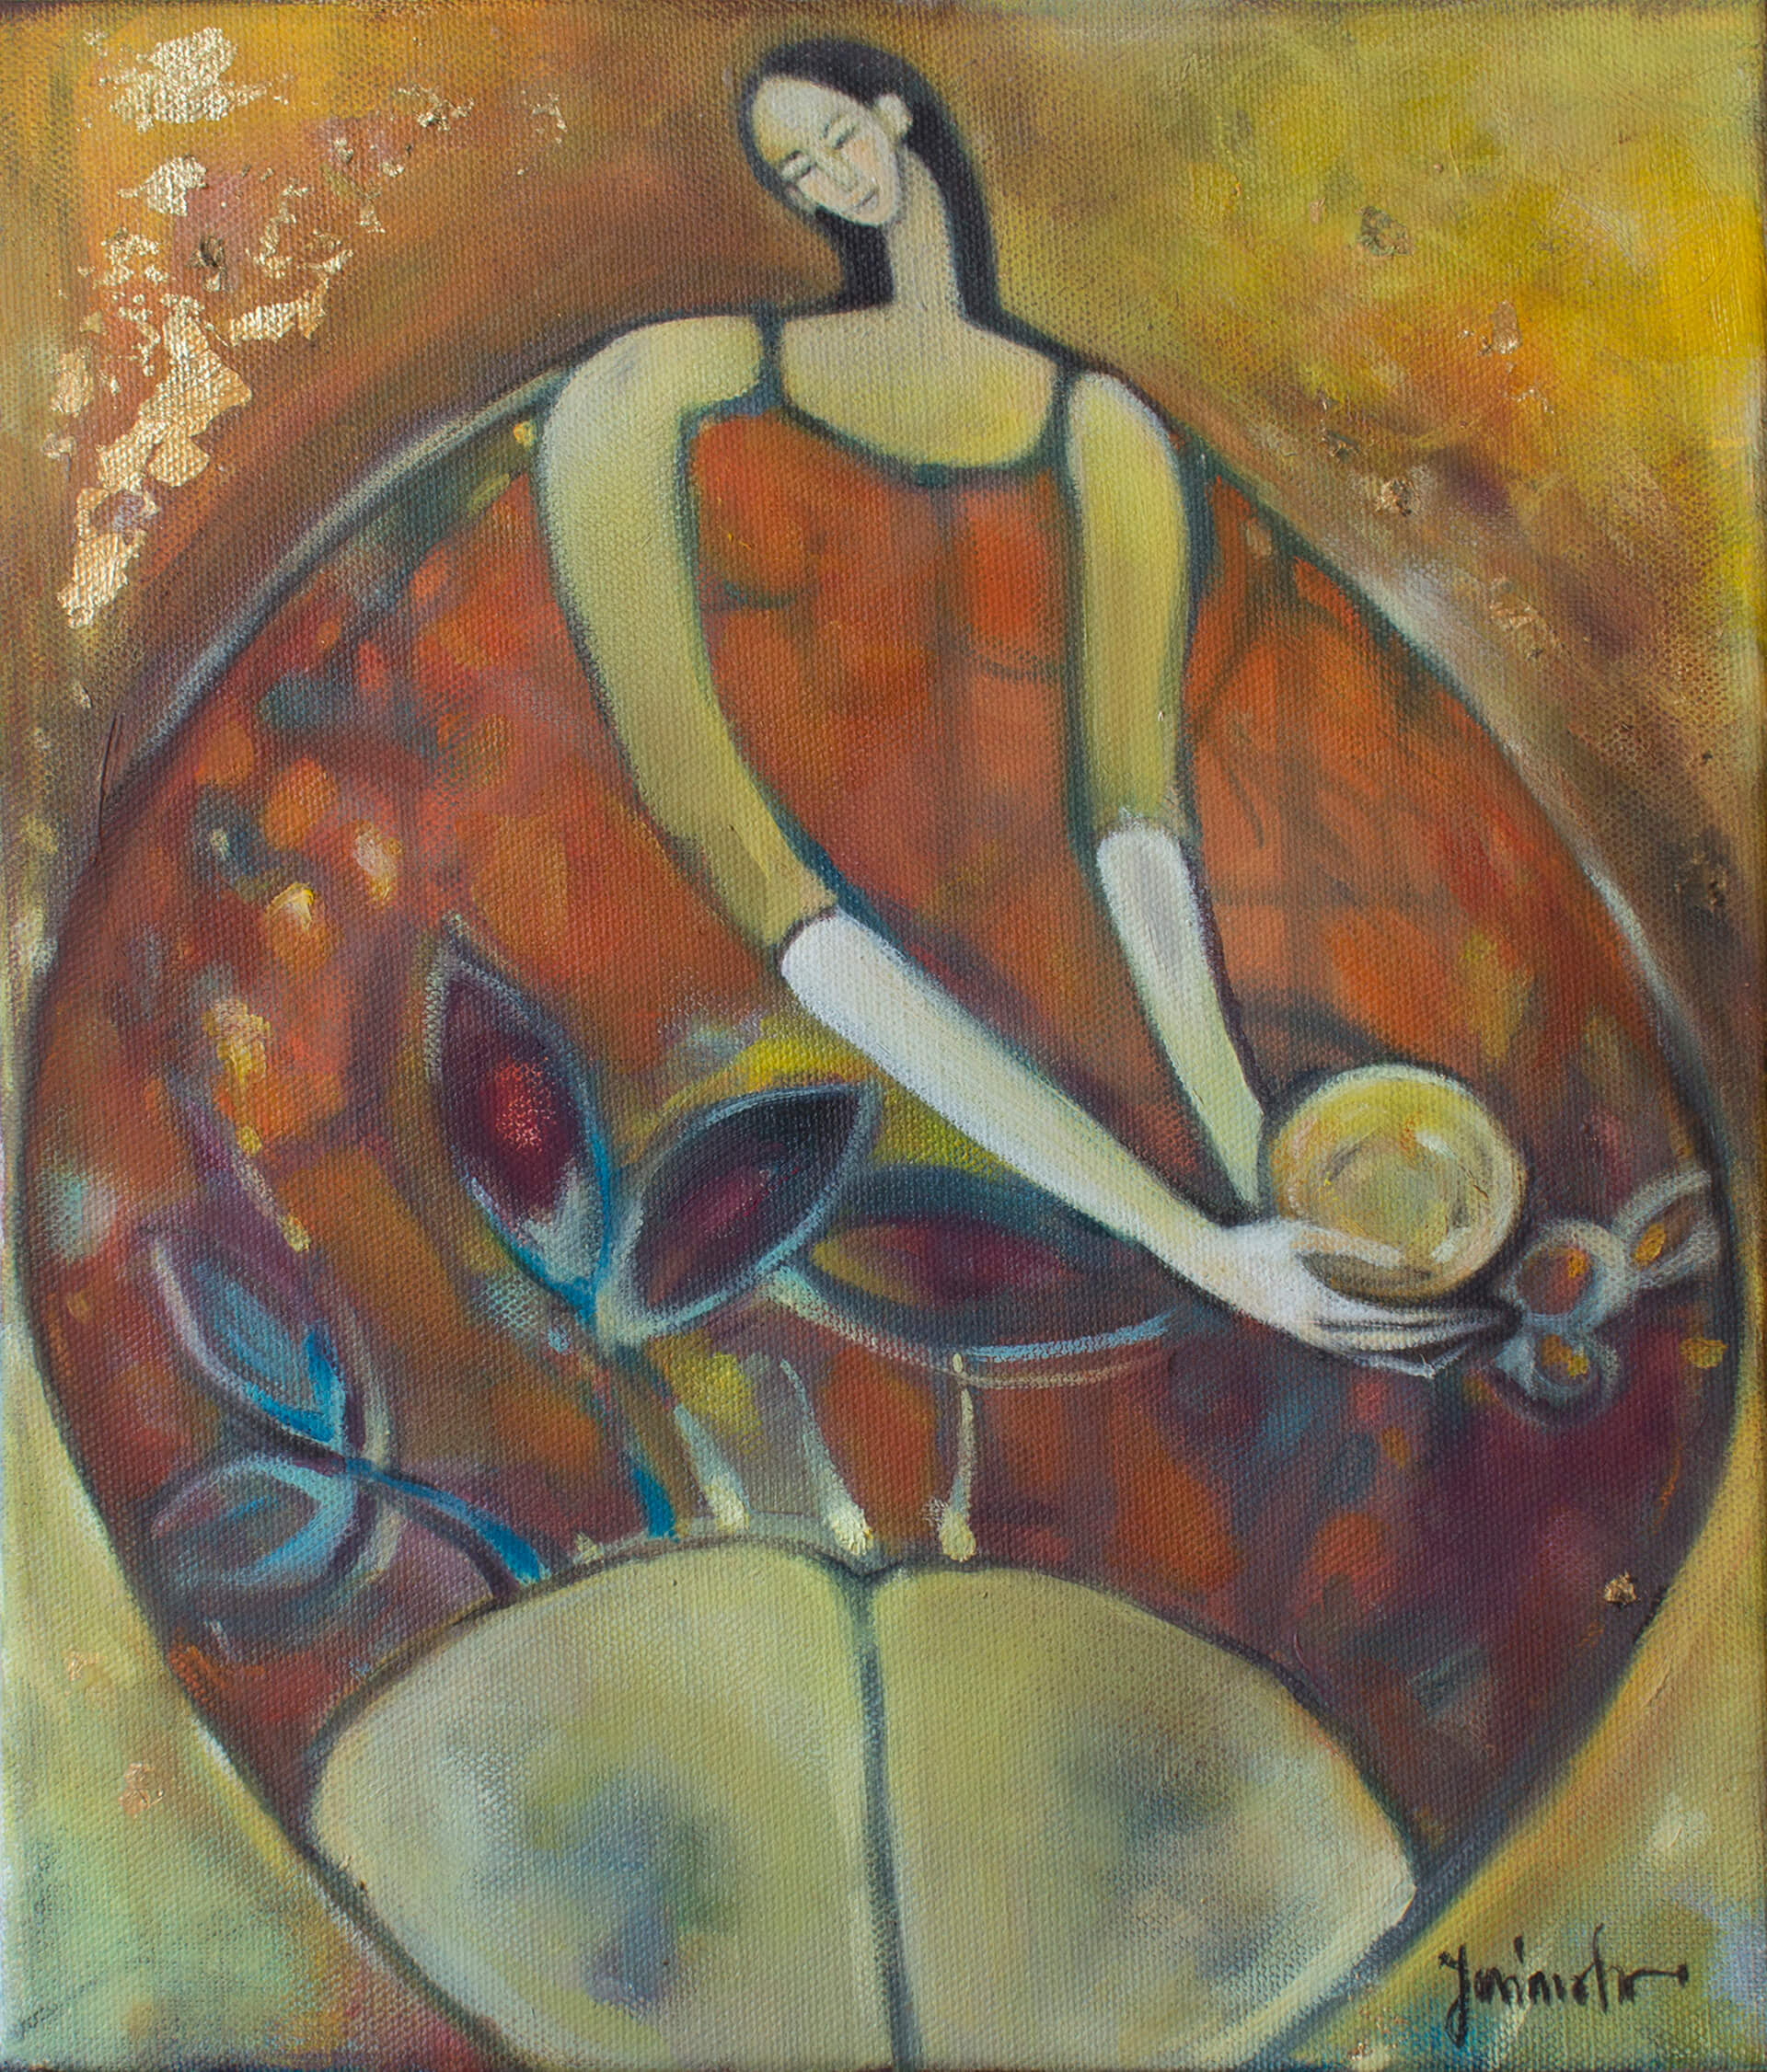 Woman and her gifts. 40x50 cm. Oil on canvas. Sold